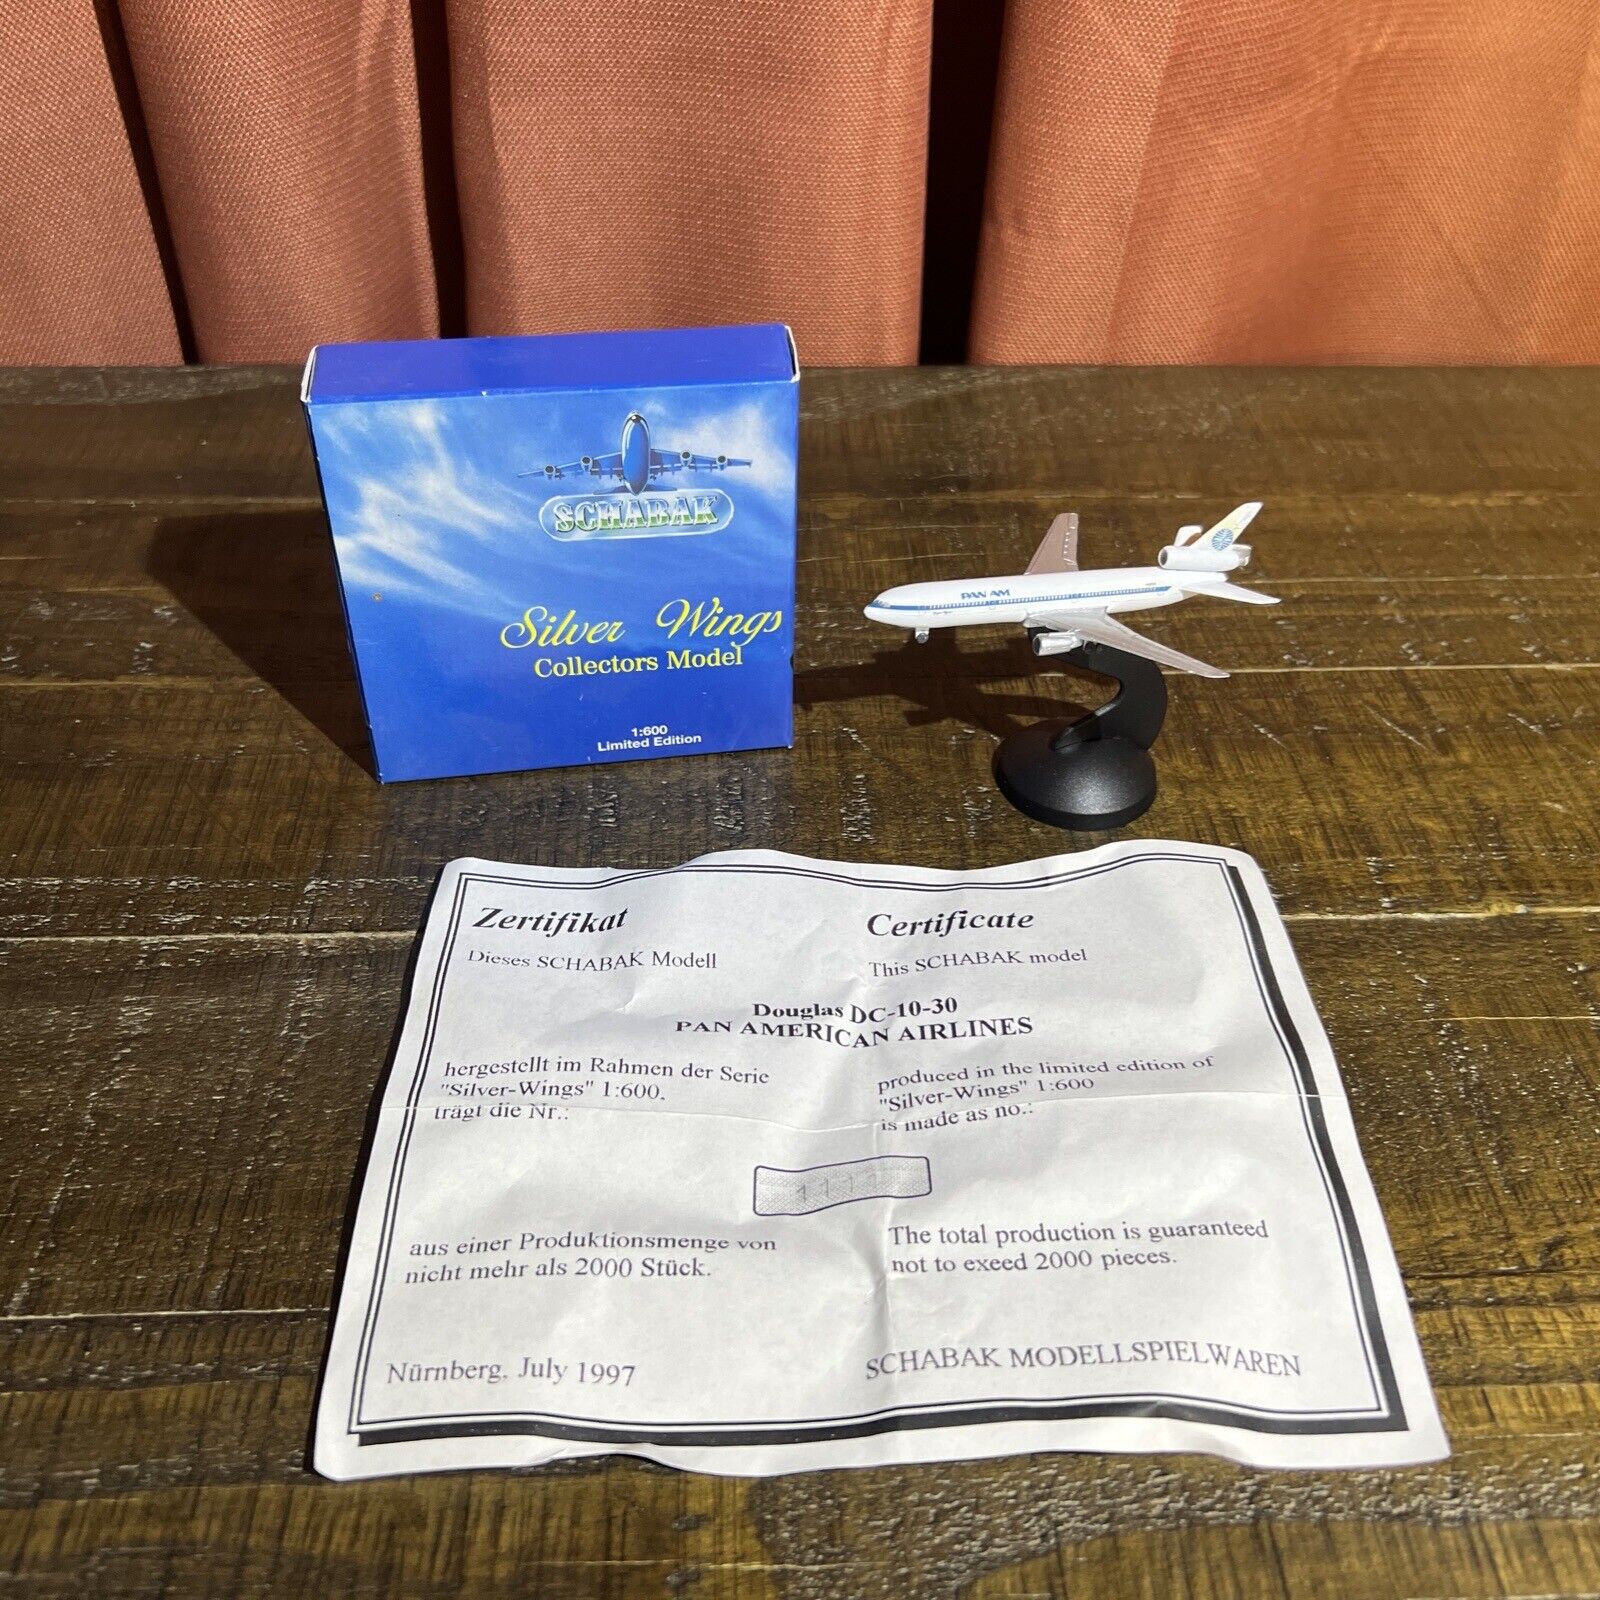 Pan Am Airlines DC-10 Aircraft German SCHABAK Diecast Model Airplane 1:600 New